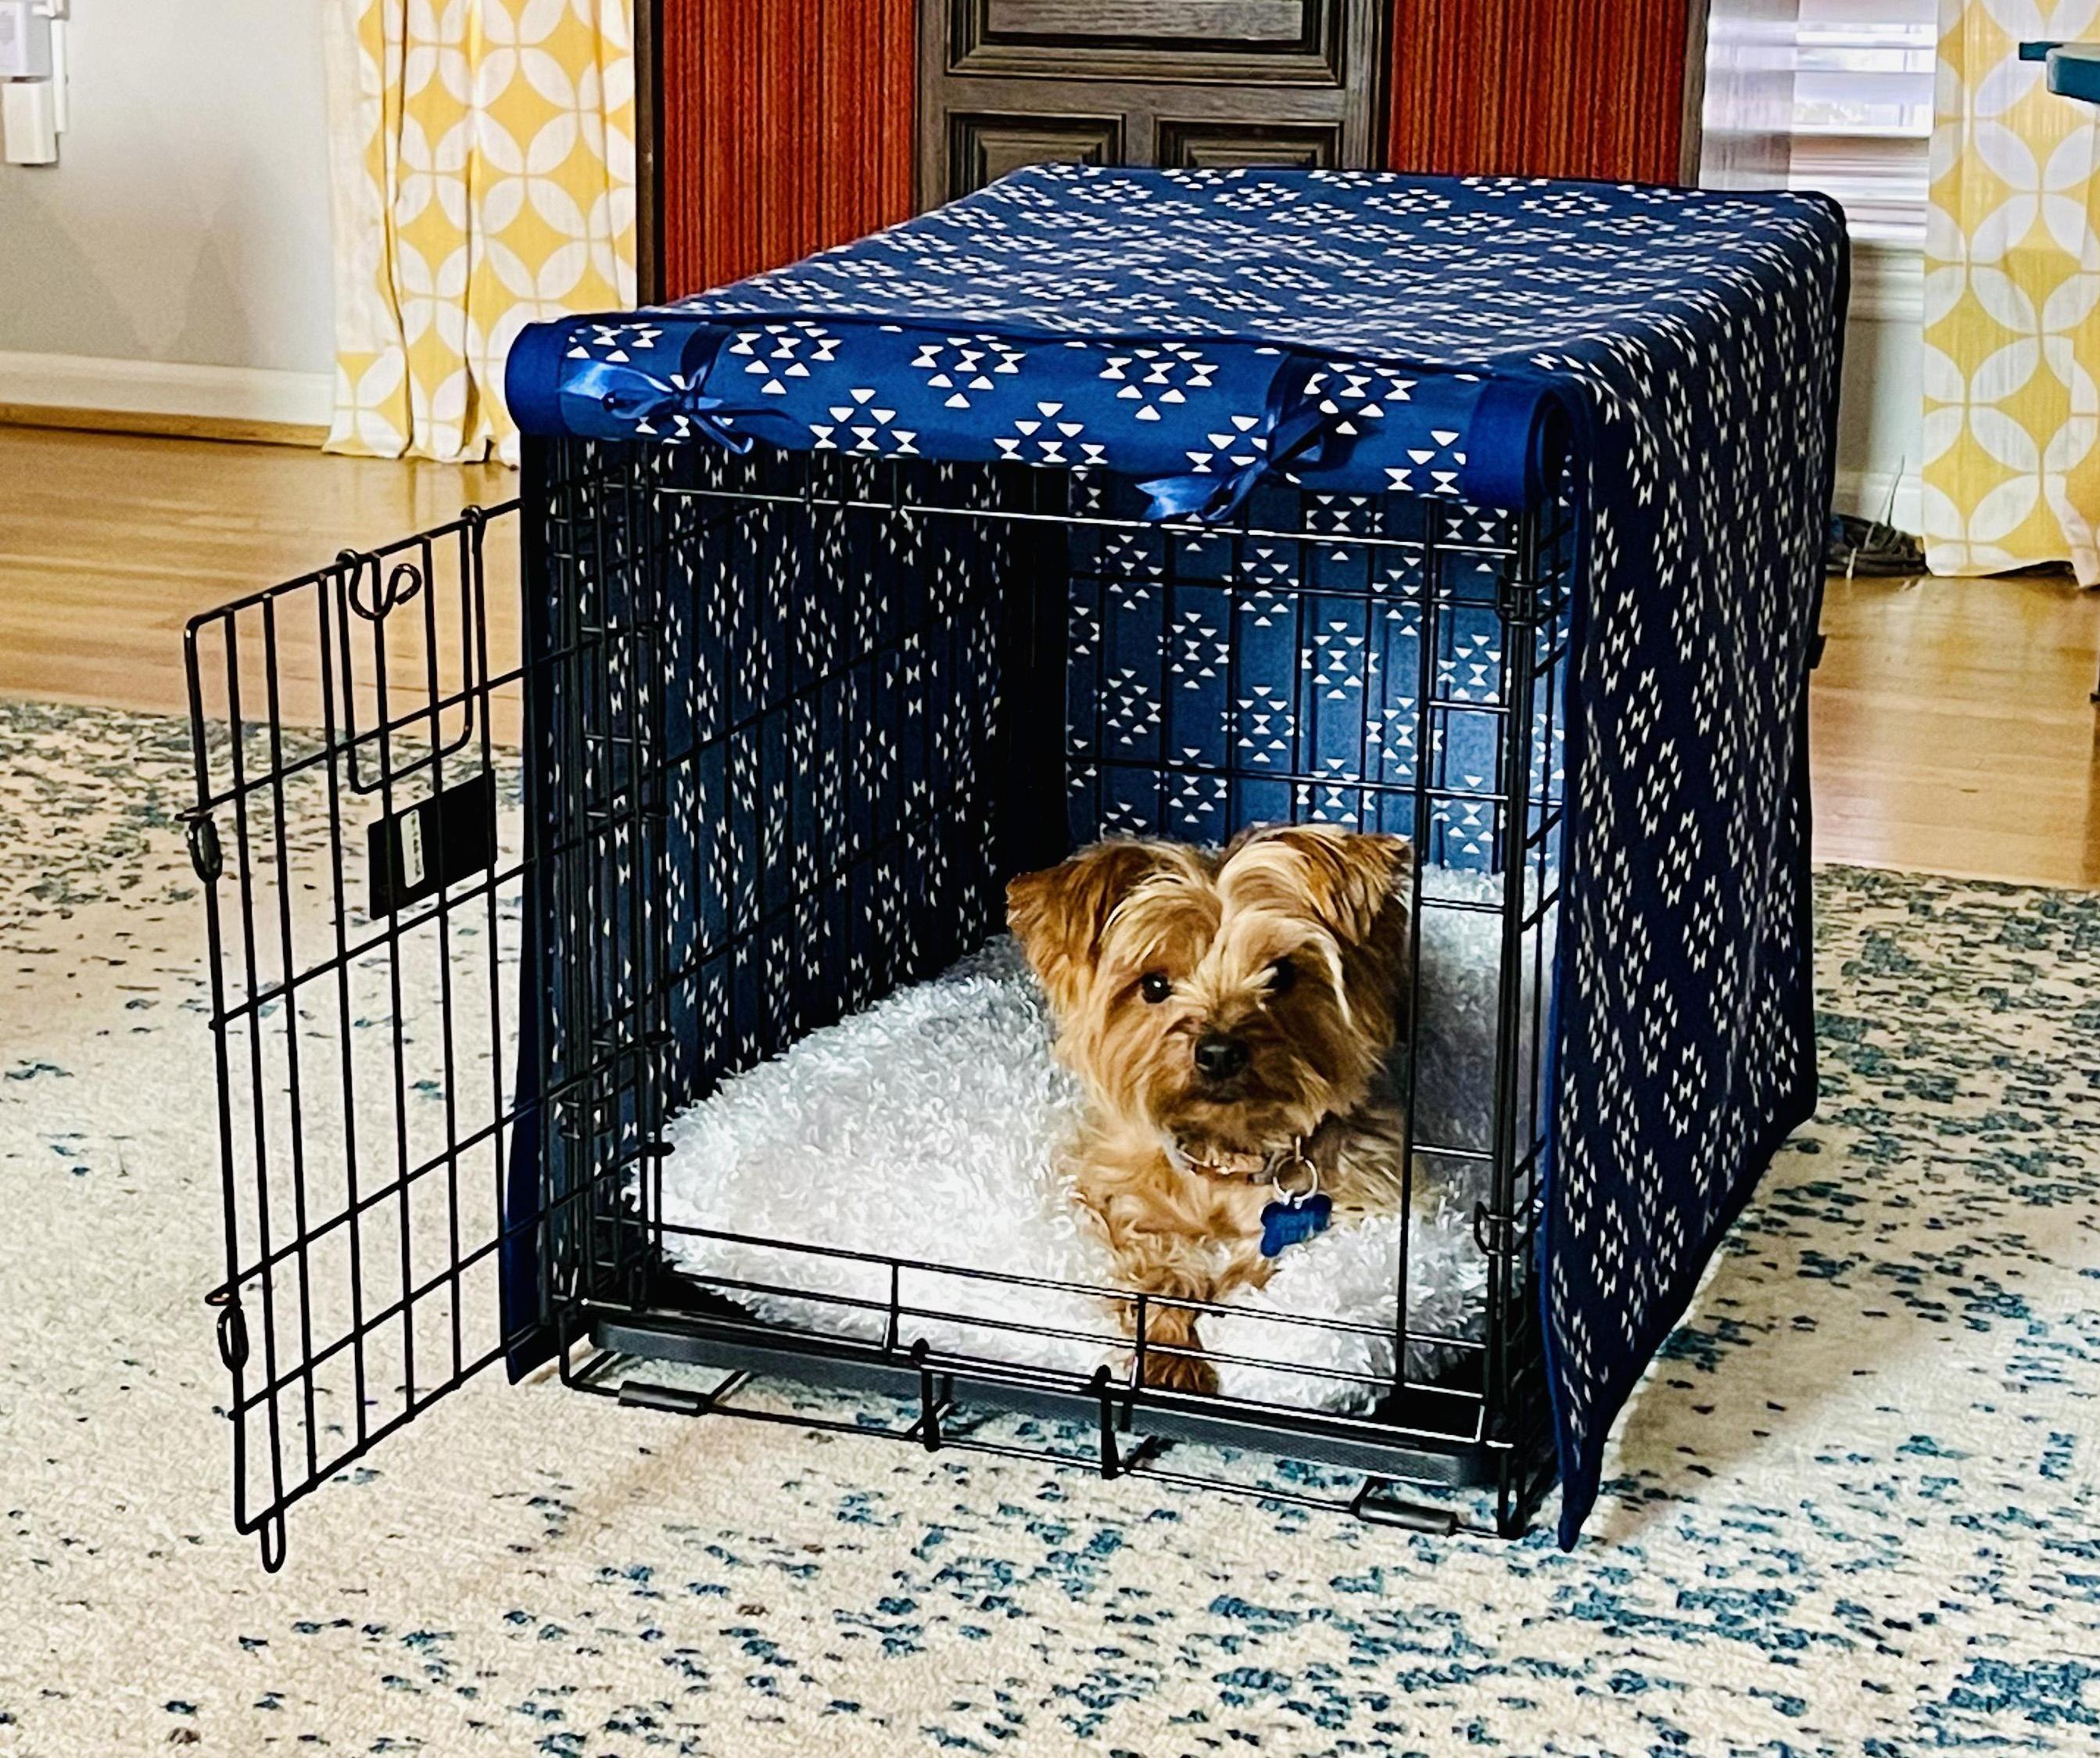 Cozy Up Your Dog's Crate With a Crate Cover + Fuzzy Mattress!